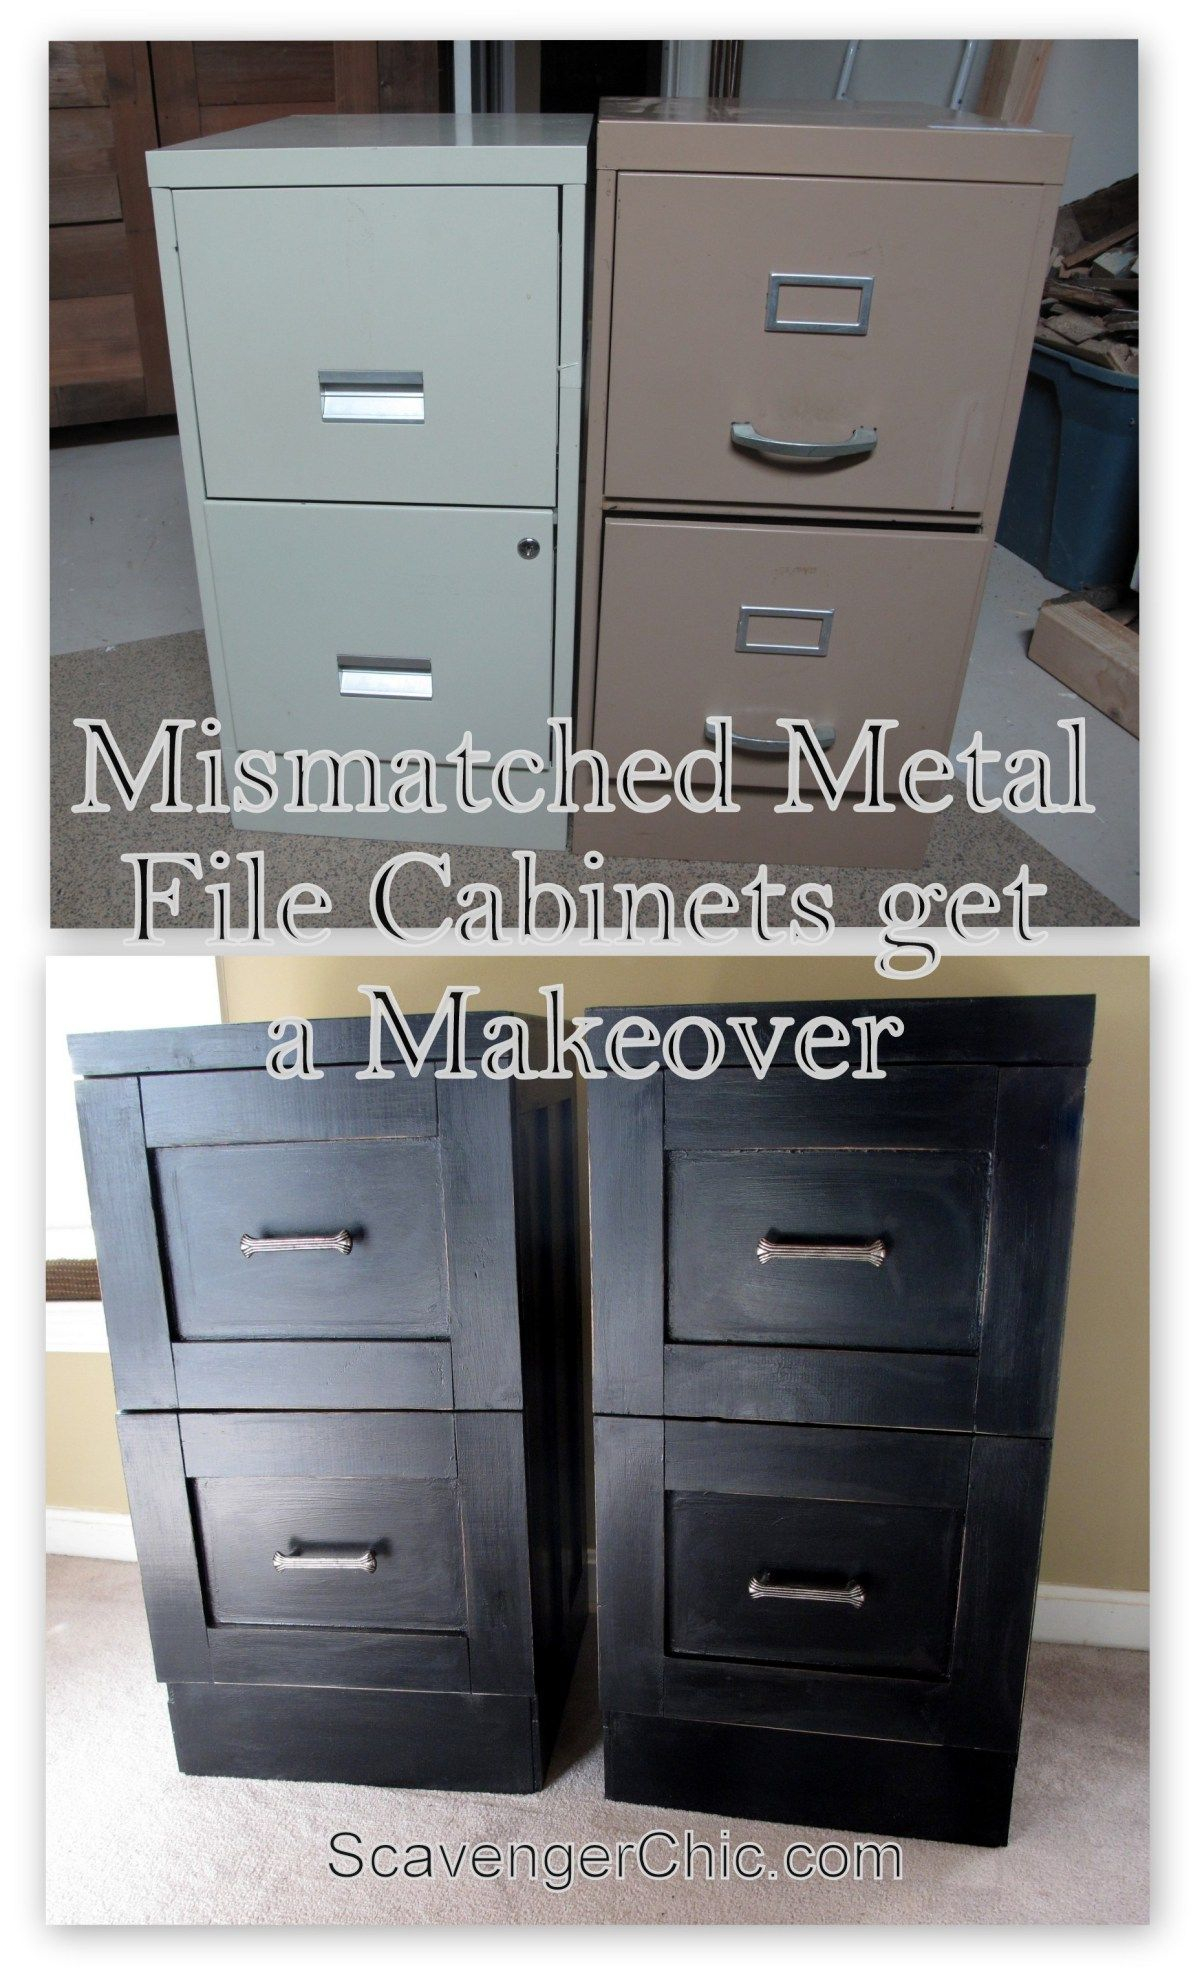 Mismatched Metal File Cabinets Get A Makeover Filing Cabinets throughout proportions 1201 X 1984